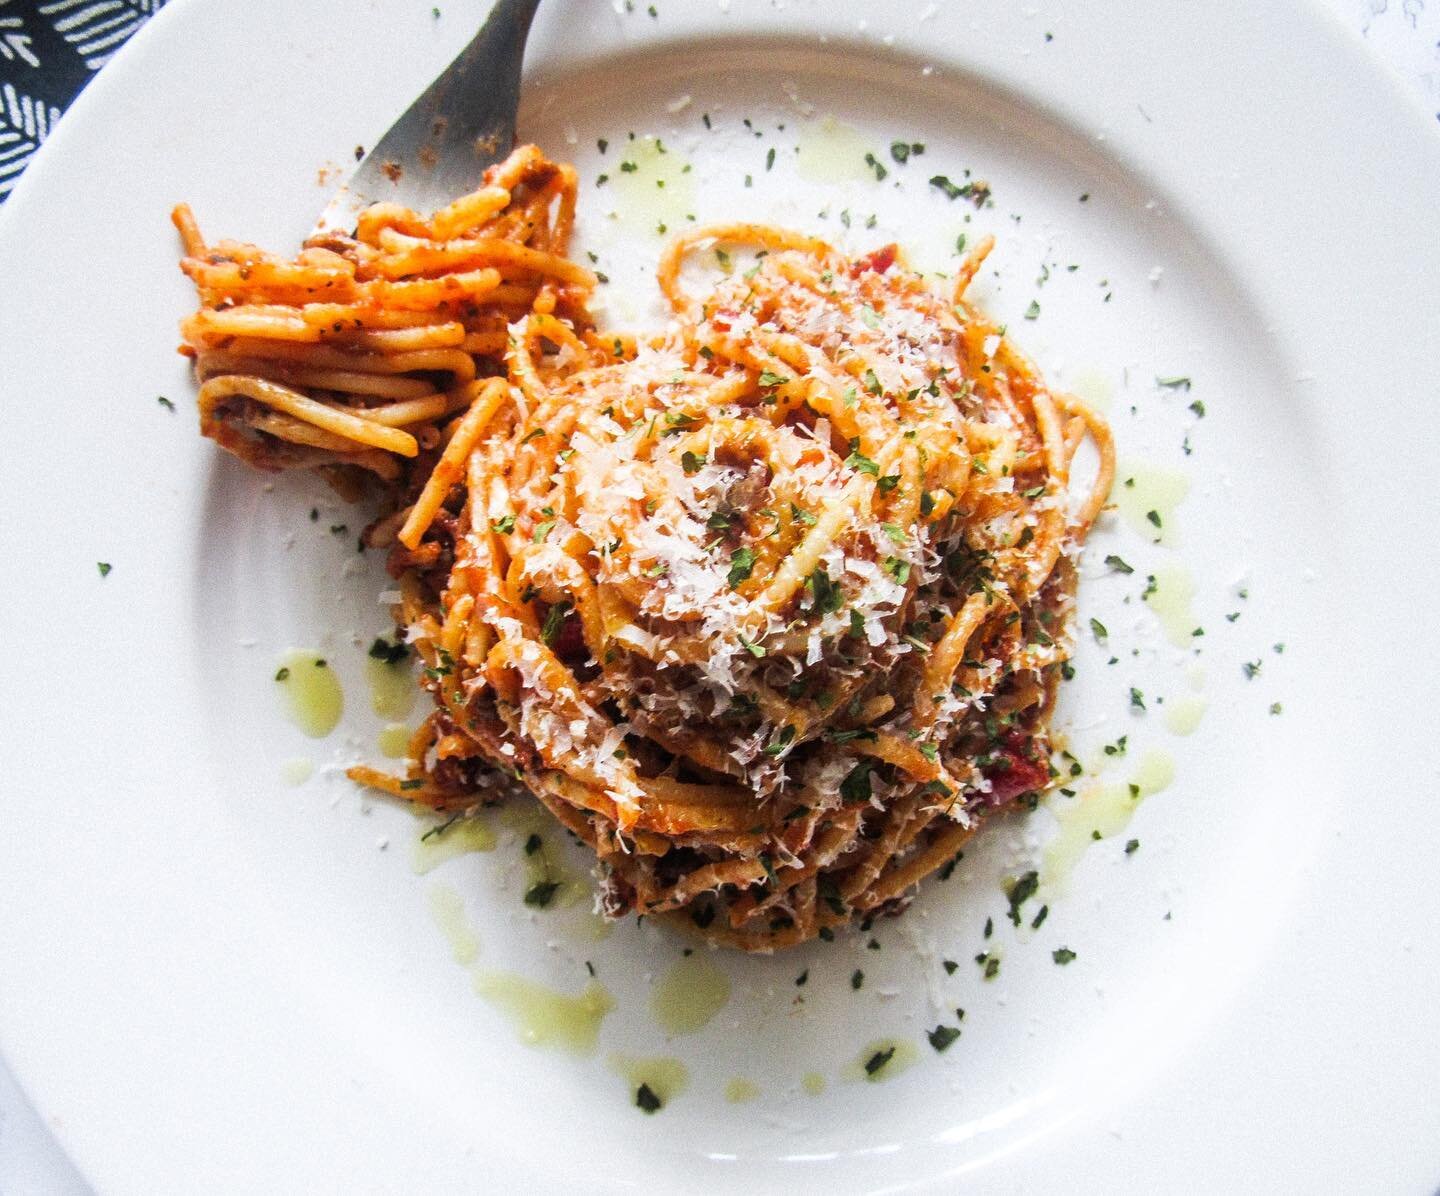 Nothing says comfort like a big bowl of Spaghetti.  There are so many ways to make this pantry staple. Today, I used a mixture of Italian sausage and ground turkey, a bit of red wine, anchovy paste, and homemade tomato sauce. The result was a delicio